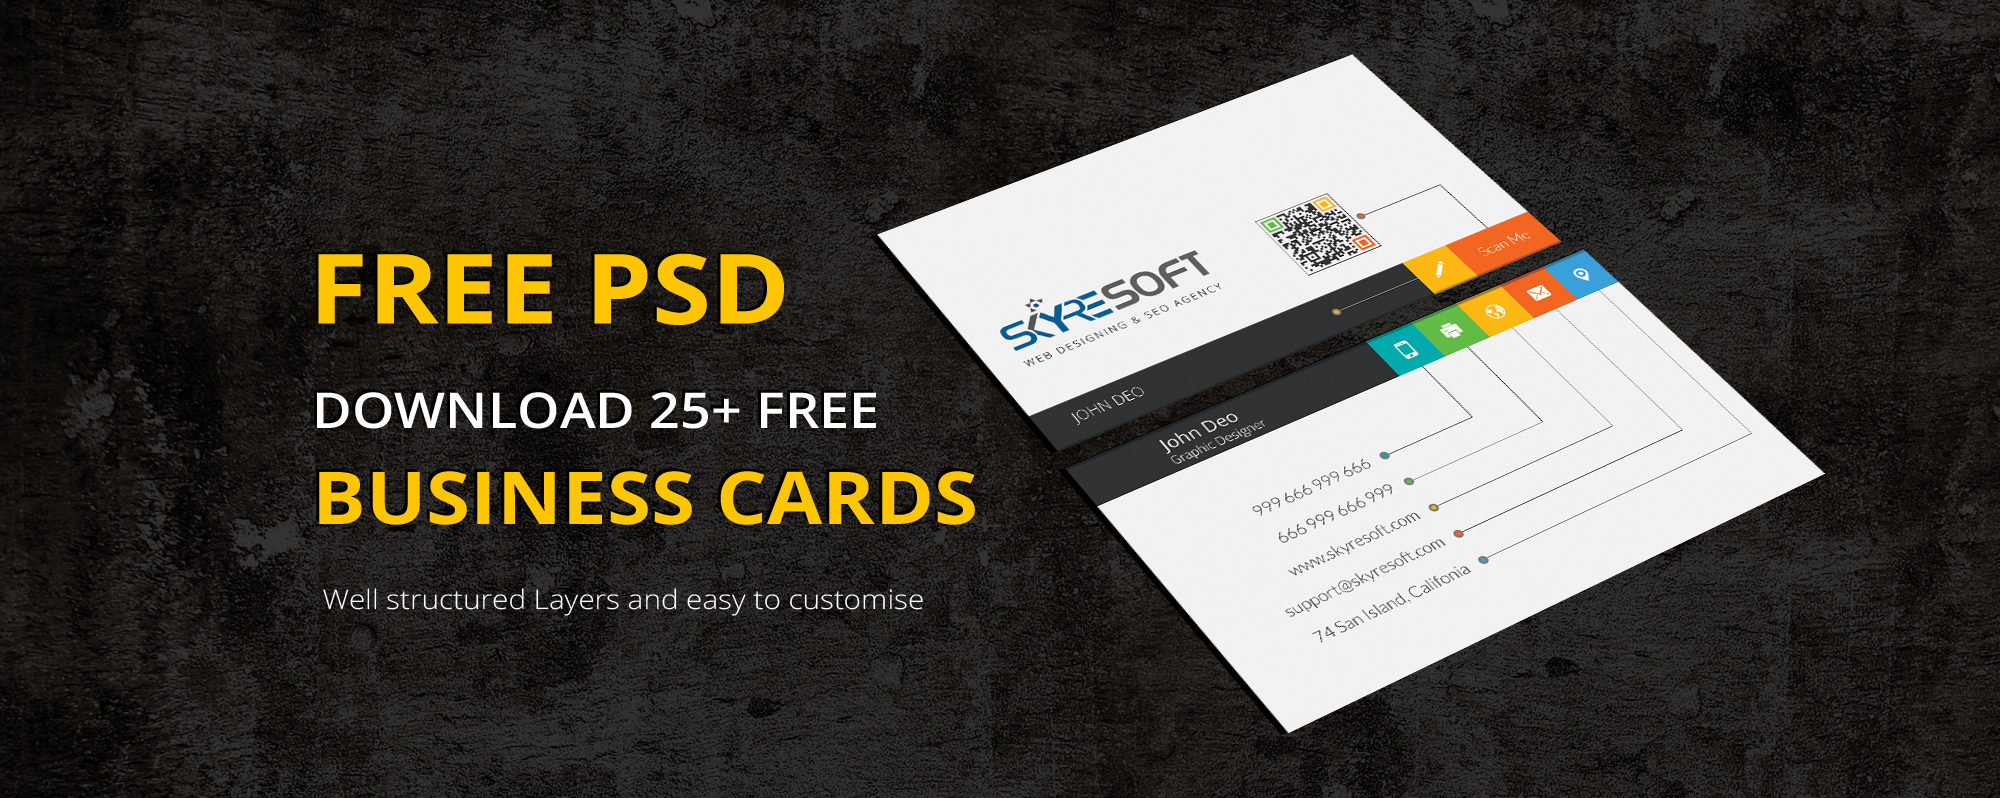 25 Creative Free Psd Business Card Templates 2019 Within Web Design Business Cards Templates